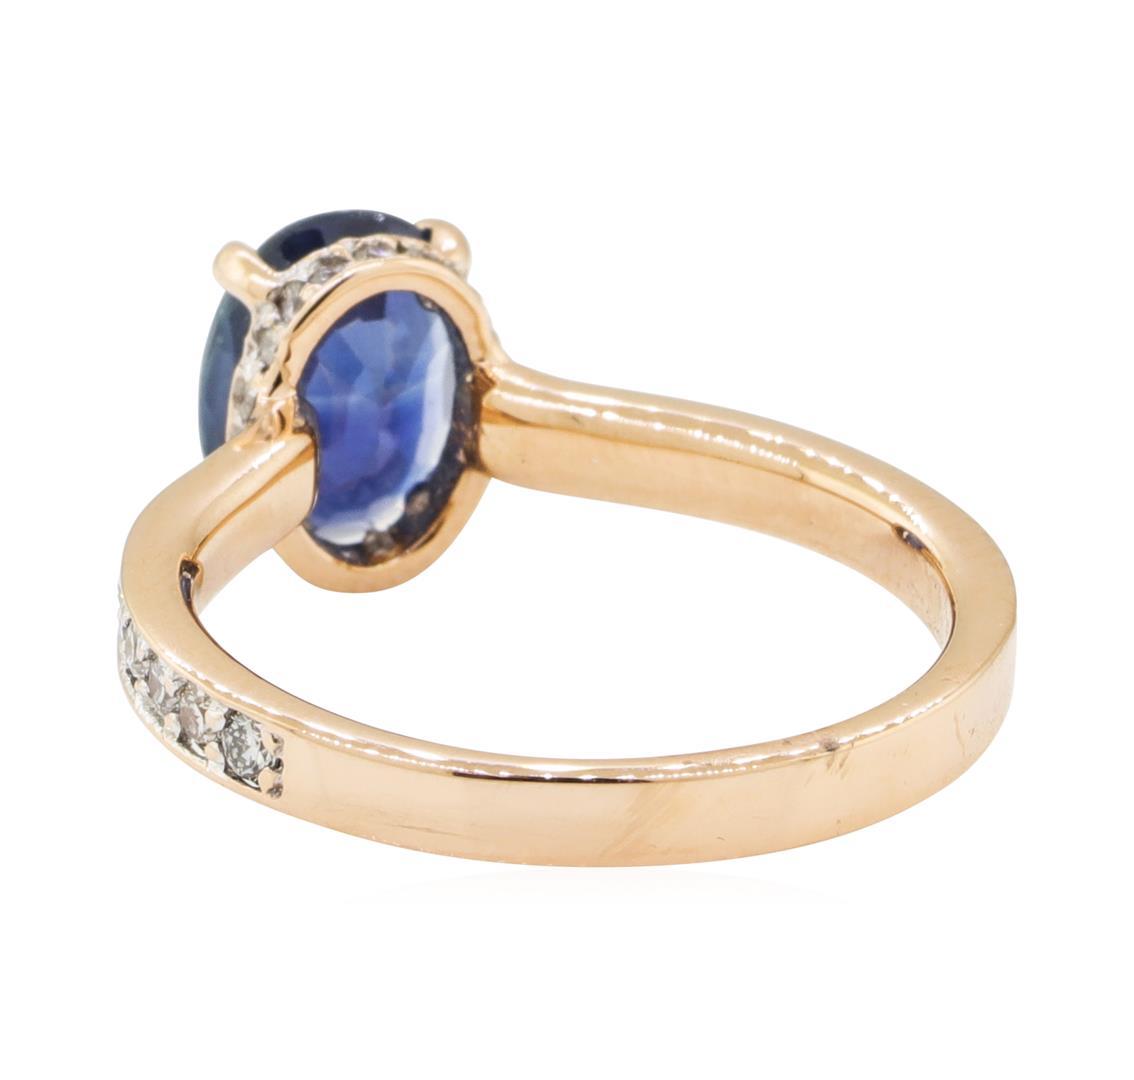 1.86 ctw Sapphire and Diamond Ring - 18KT Rose Gold